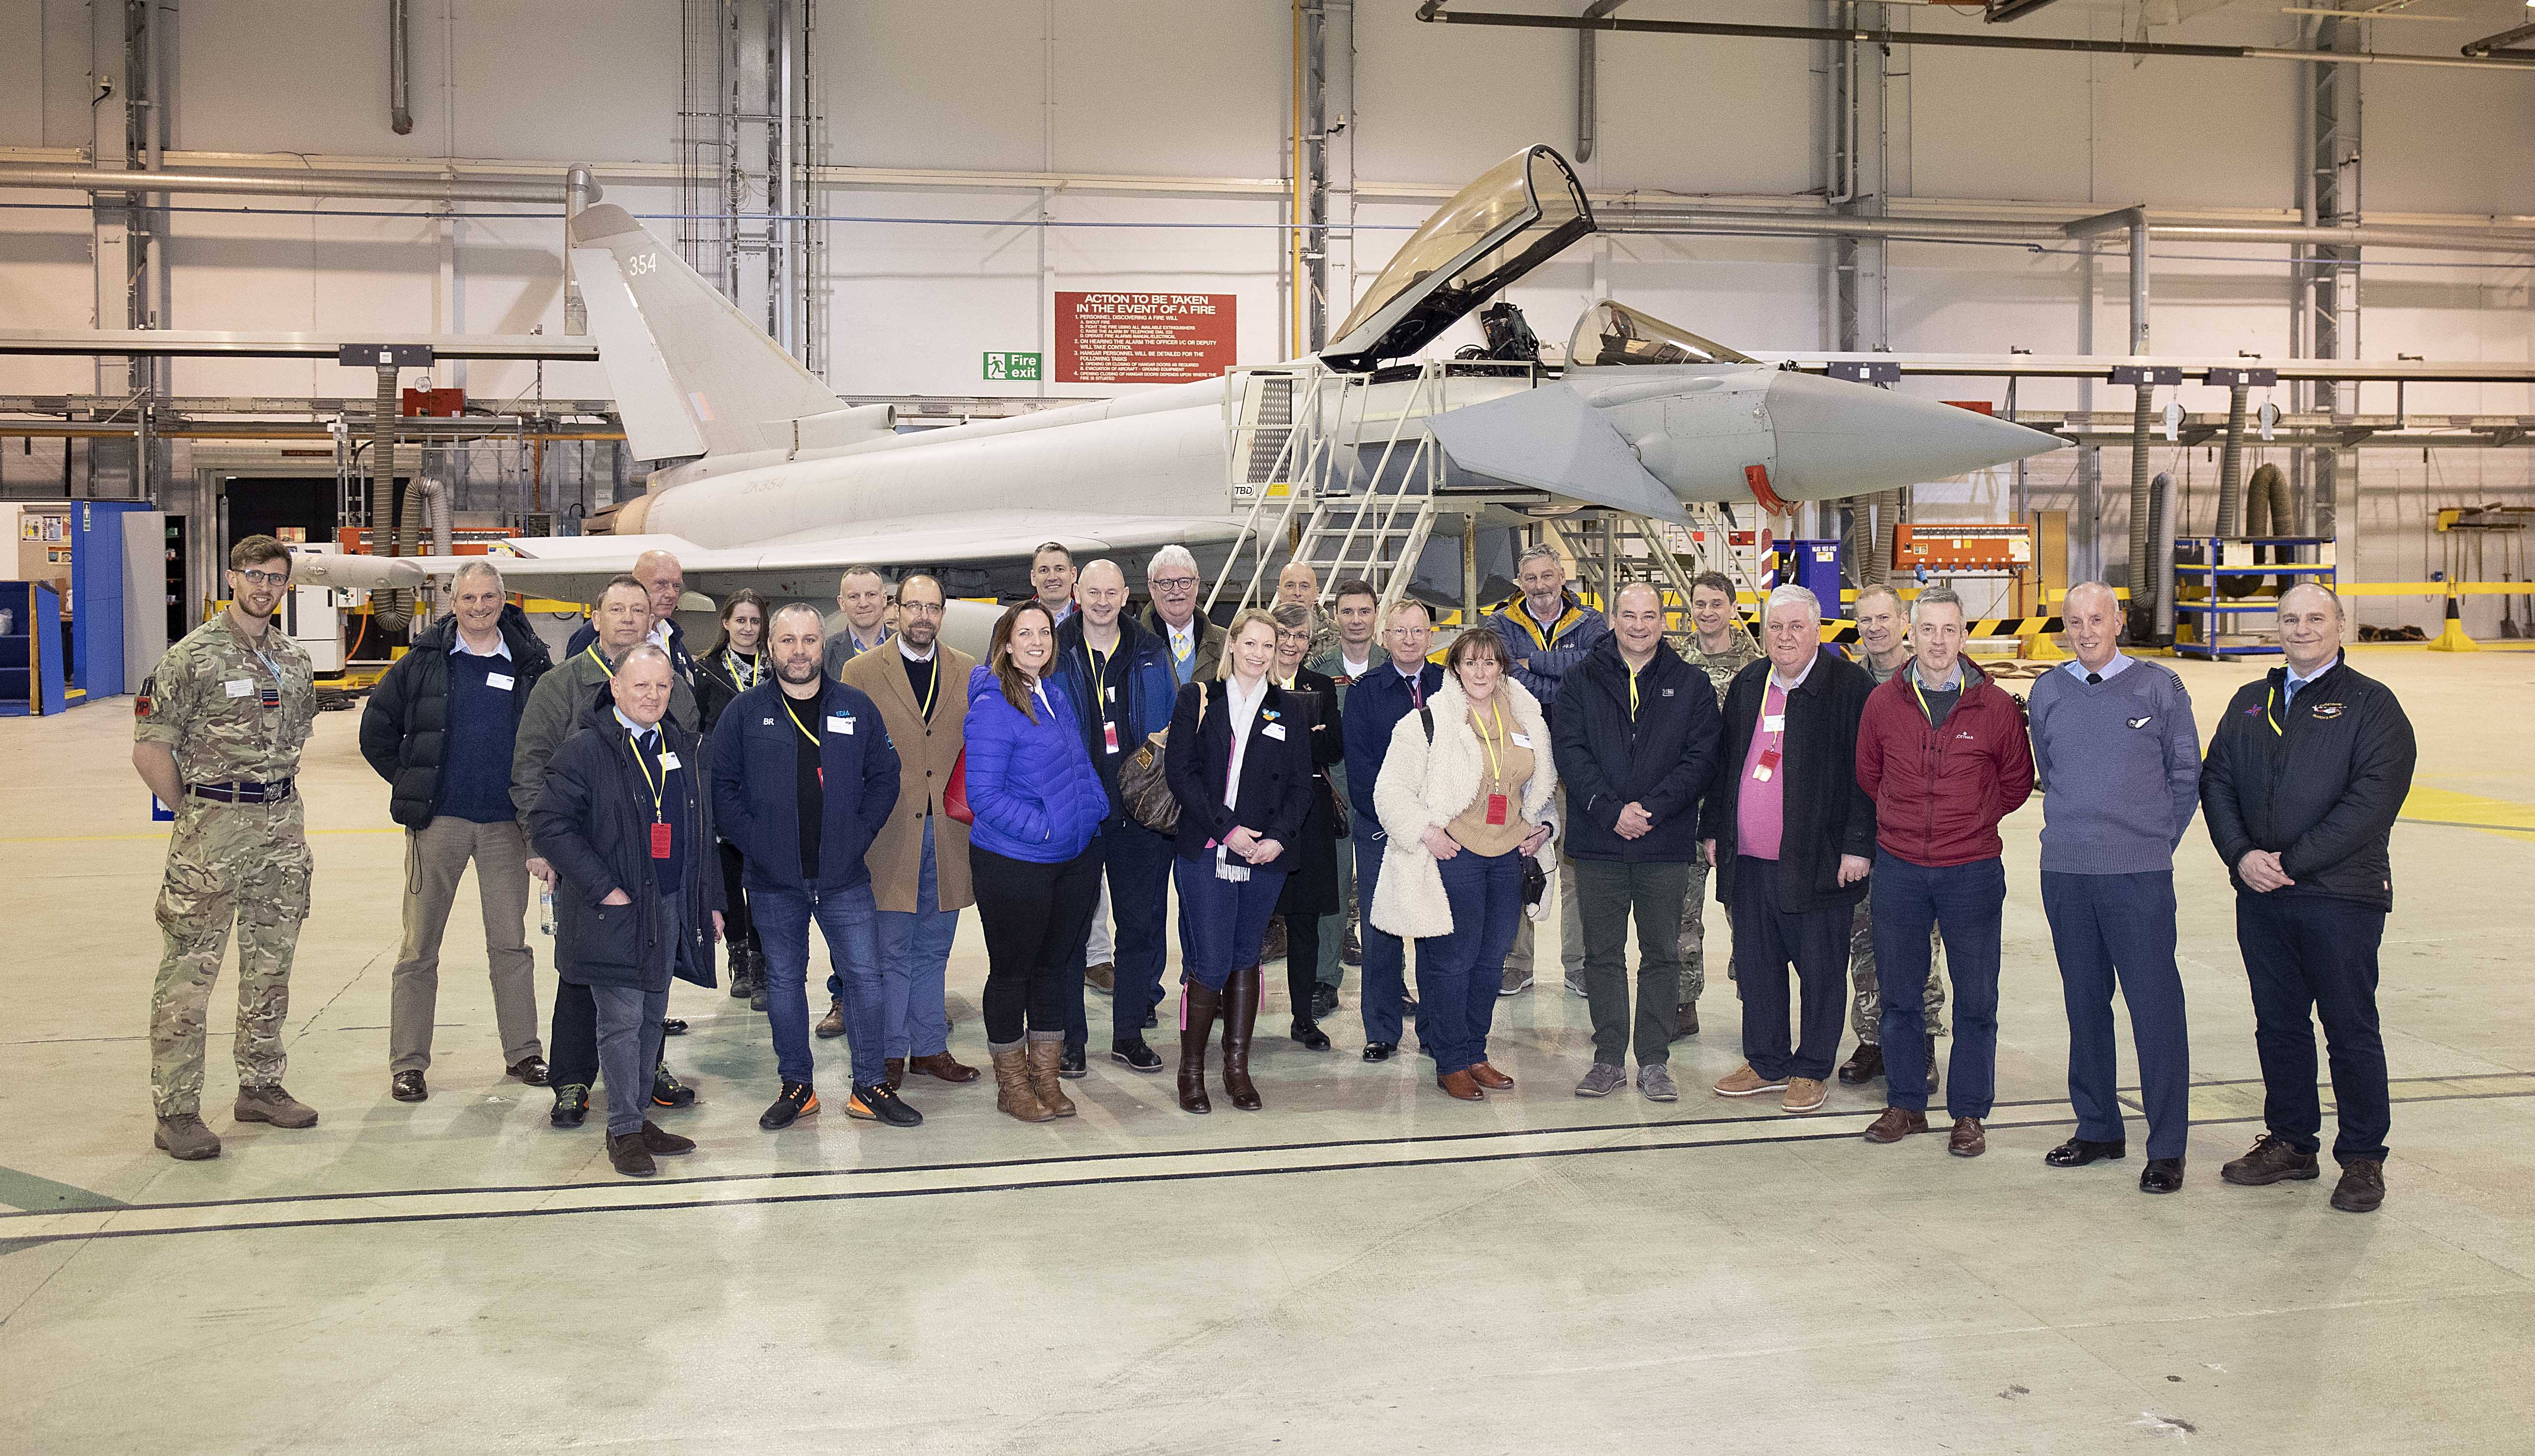 Personnel and members of the public stand by a Typhoon in the hangar.